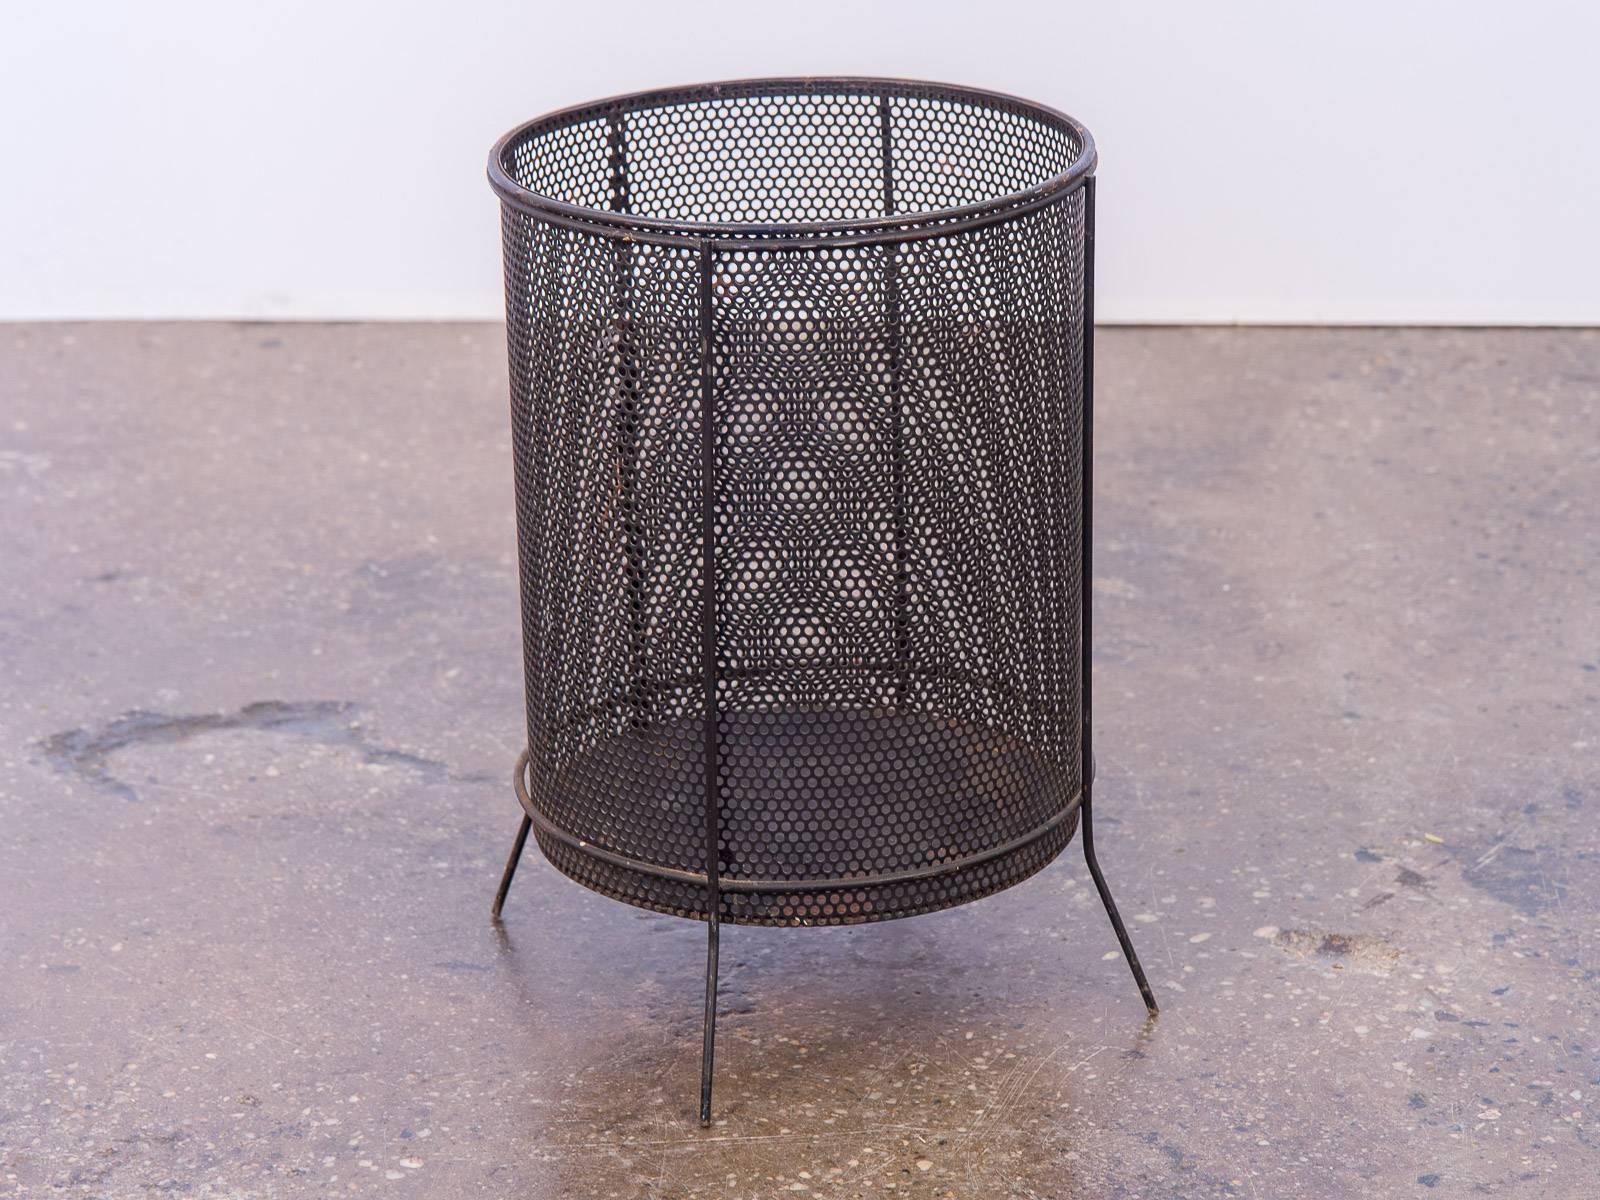 Vintage 1960s, black mesh steel wastebasket, in the style of Richard Galef. Has some age-appropriate wear, minimal chipping to the enamel, but is in very good vintage condition with years of use still. A stylish Eames-era addition for the home